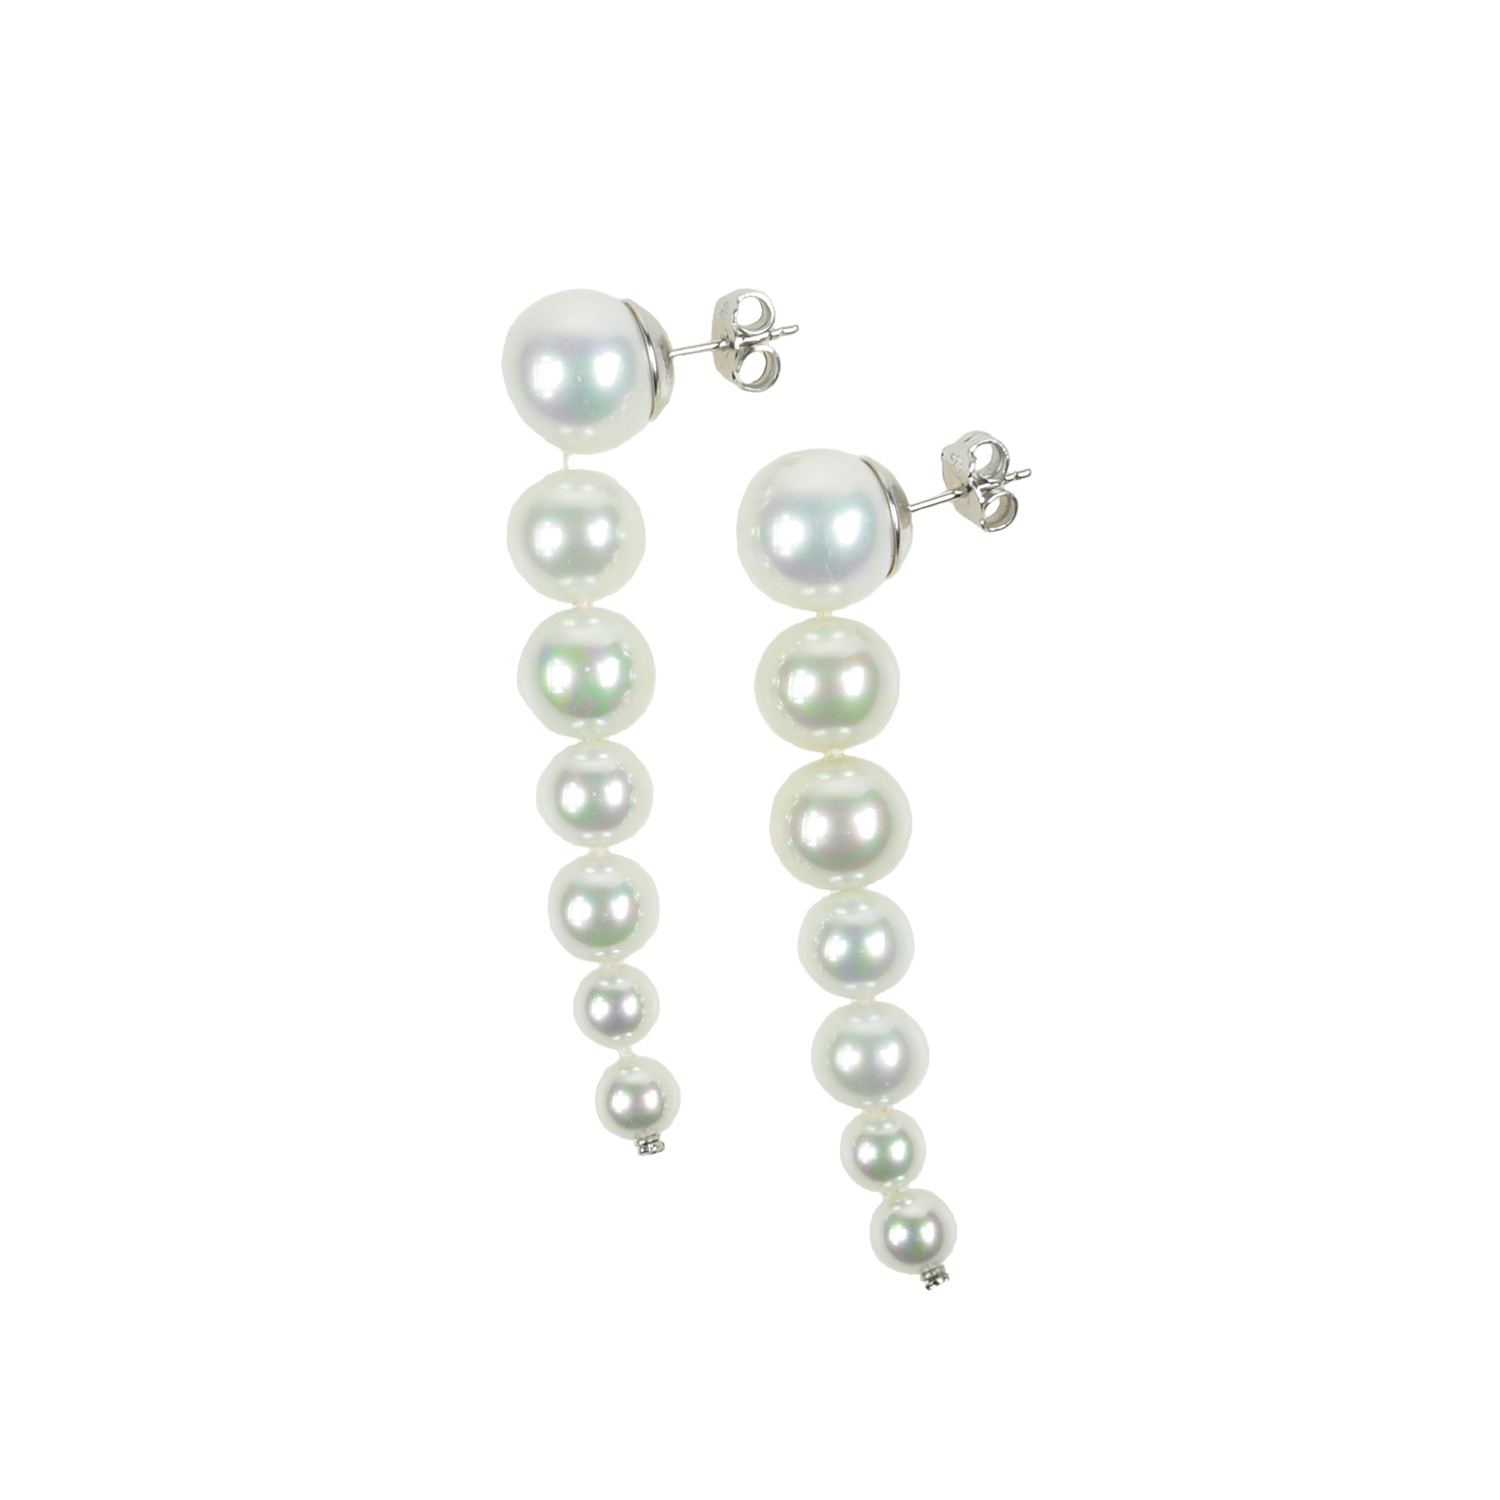 Classic earrings with diminishing white pearls